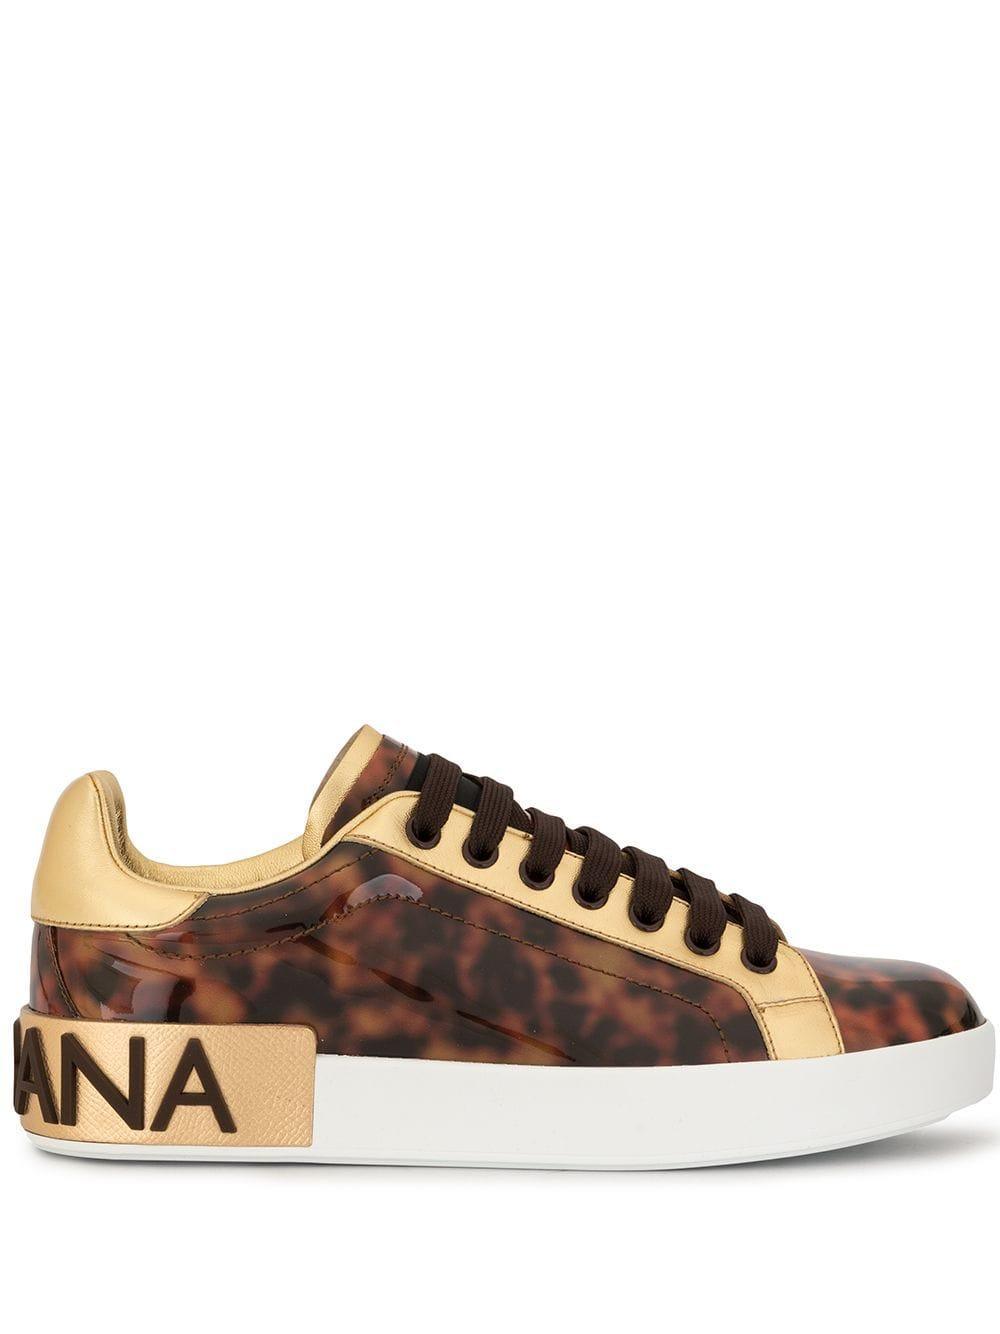 Dolce & Gabbana Leather Tortoiseshell Low-top Sneakers in Brown - Lyst